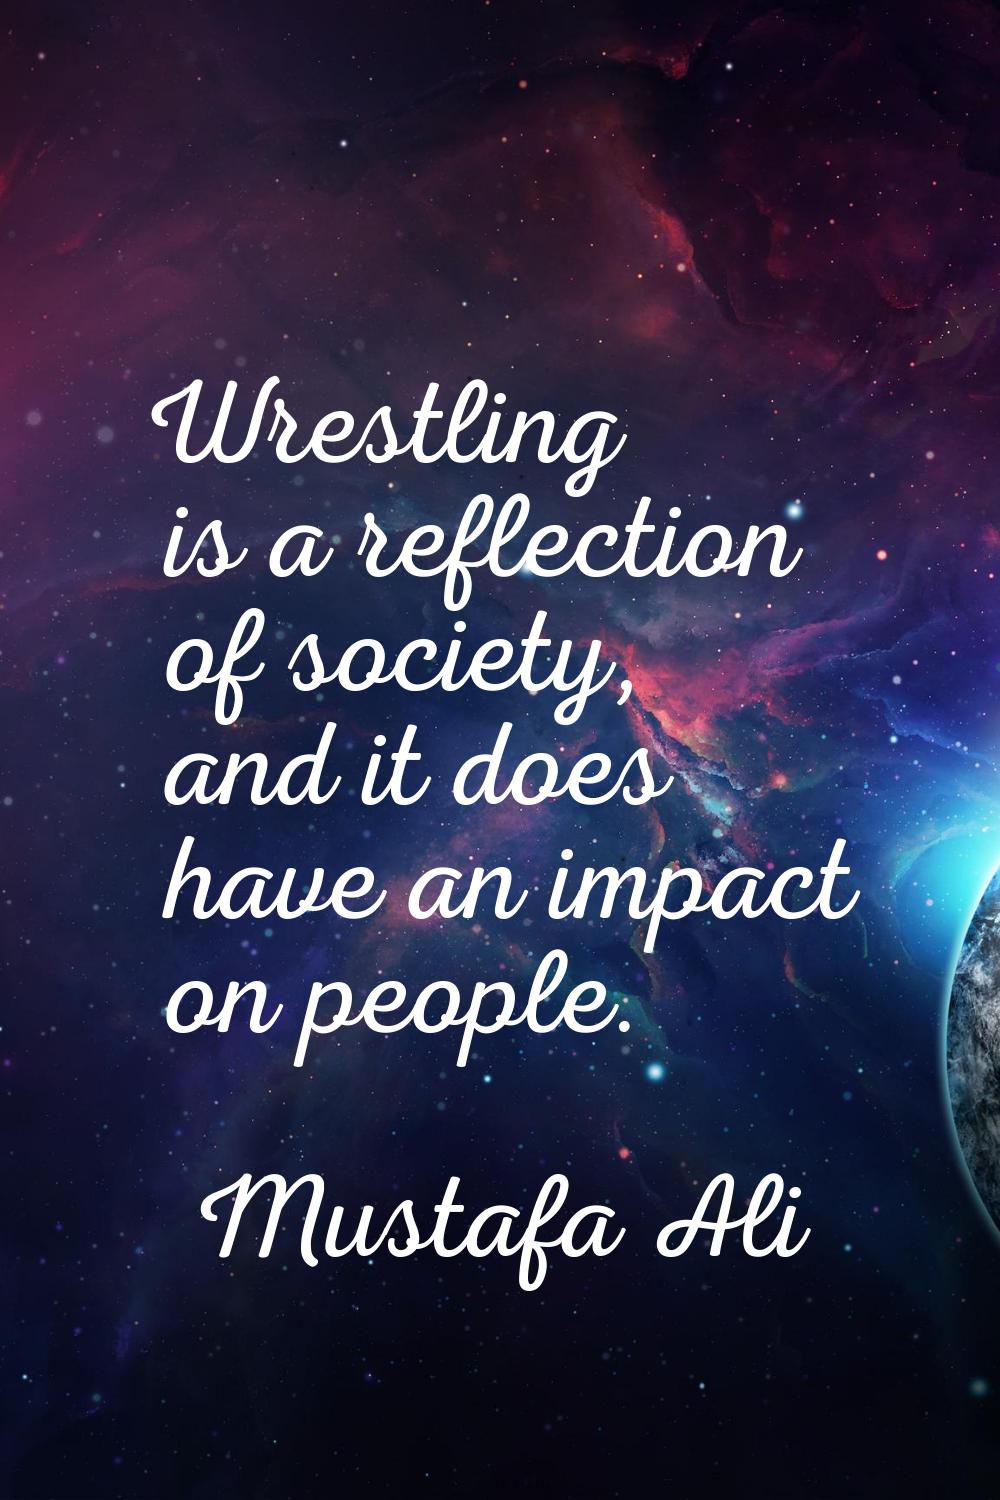 Wrestling is a reflection of society, and it does have an impact on people.